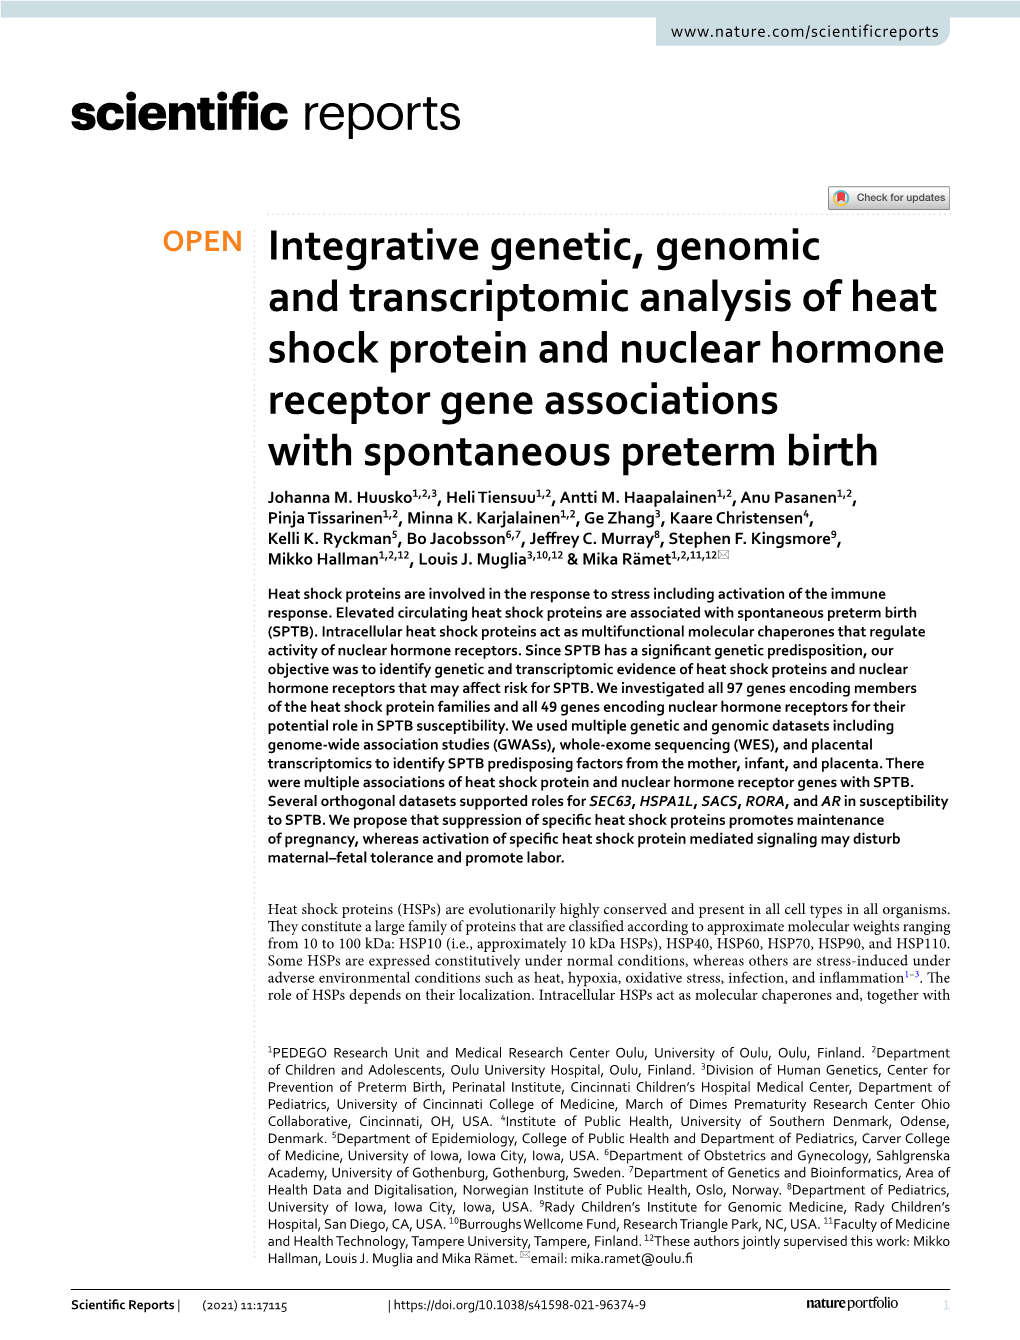 Integrative Genetic, Genomic and Transcriptomic Analysis of Heat Shock Protein and Nuclear Hormone Receptor Gene Associations with Spontaneous Preterm Birth Johanna M